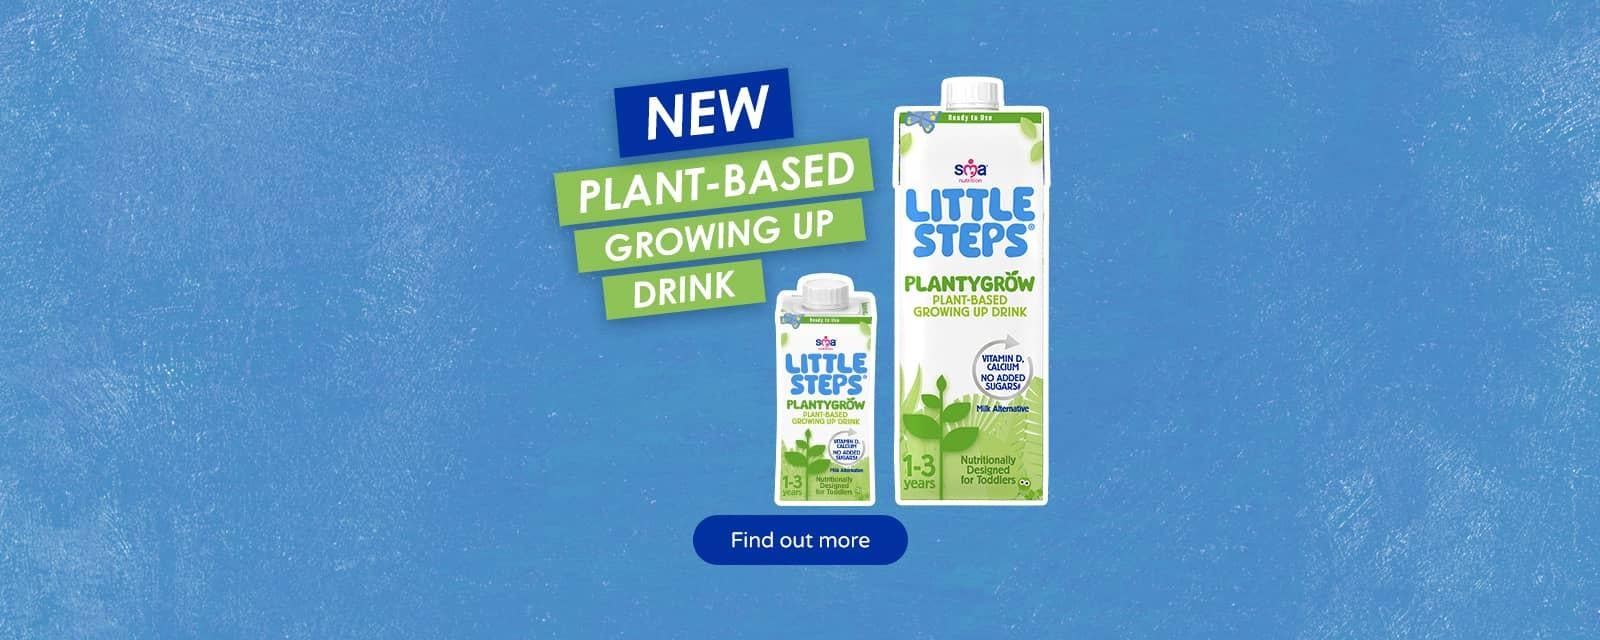 Introducing NEW LITTLE STEPS® PLANTYGROW Growing Up Drink!